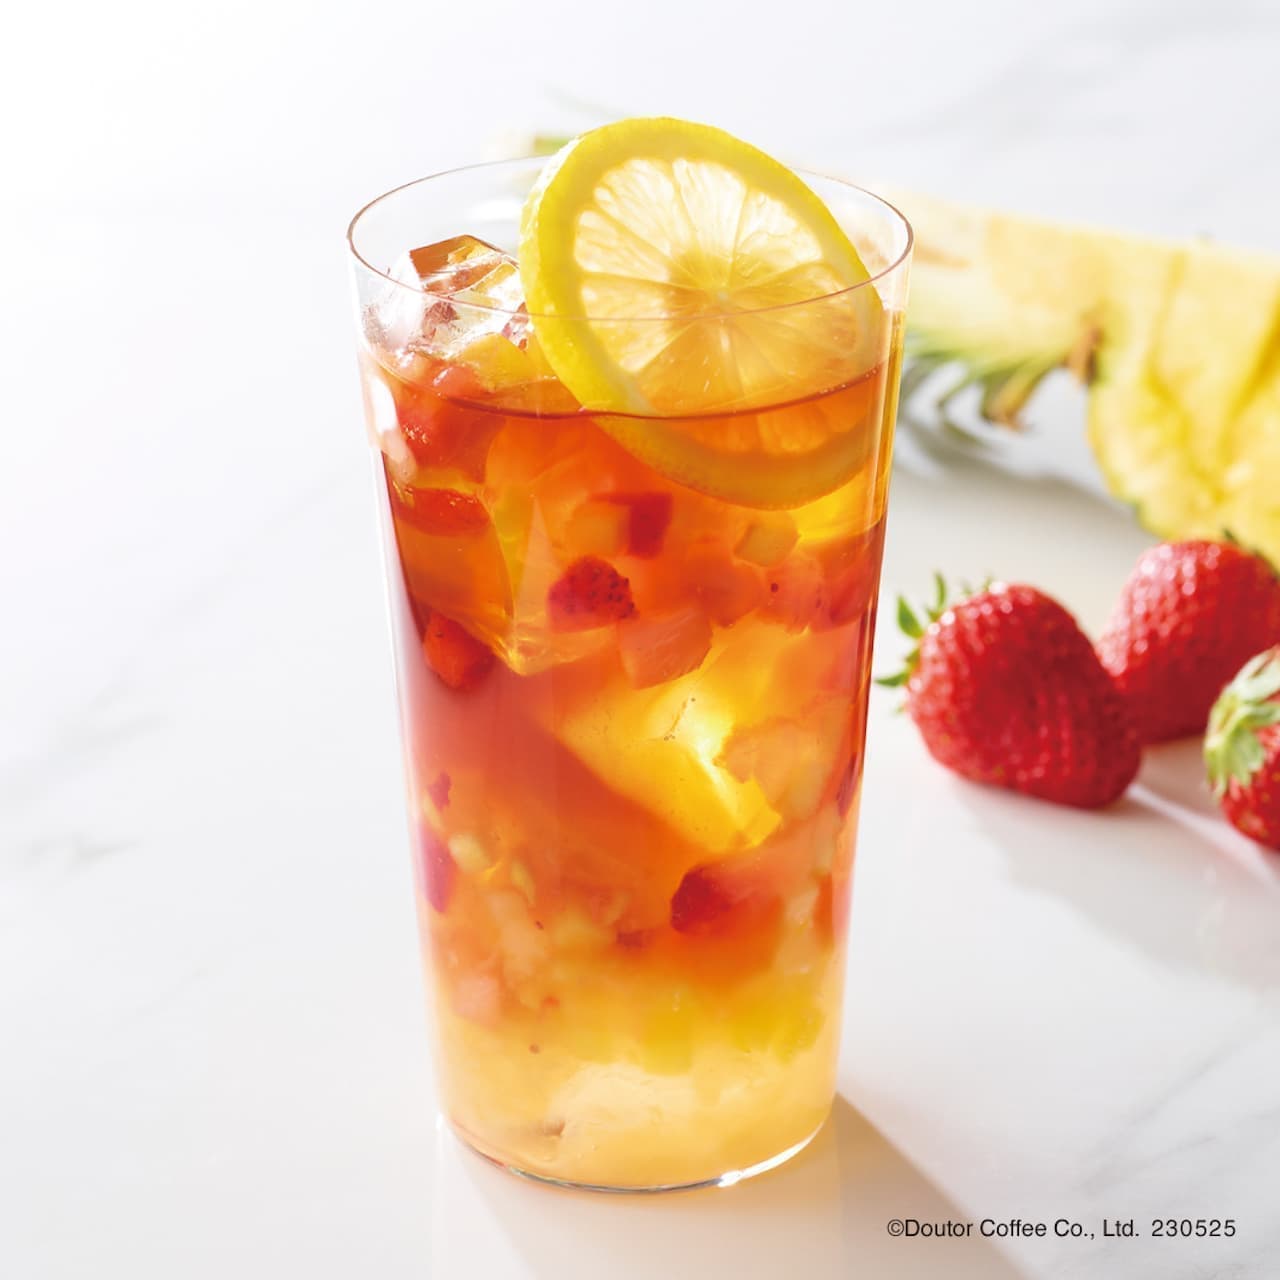 Excelsior Cafe "Fruit Peach Tea Strawberry & Pineapple